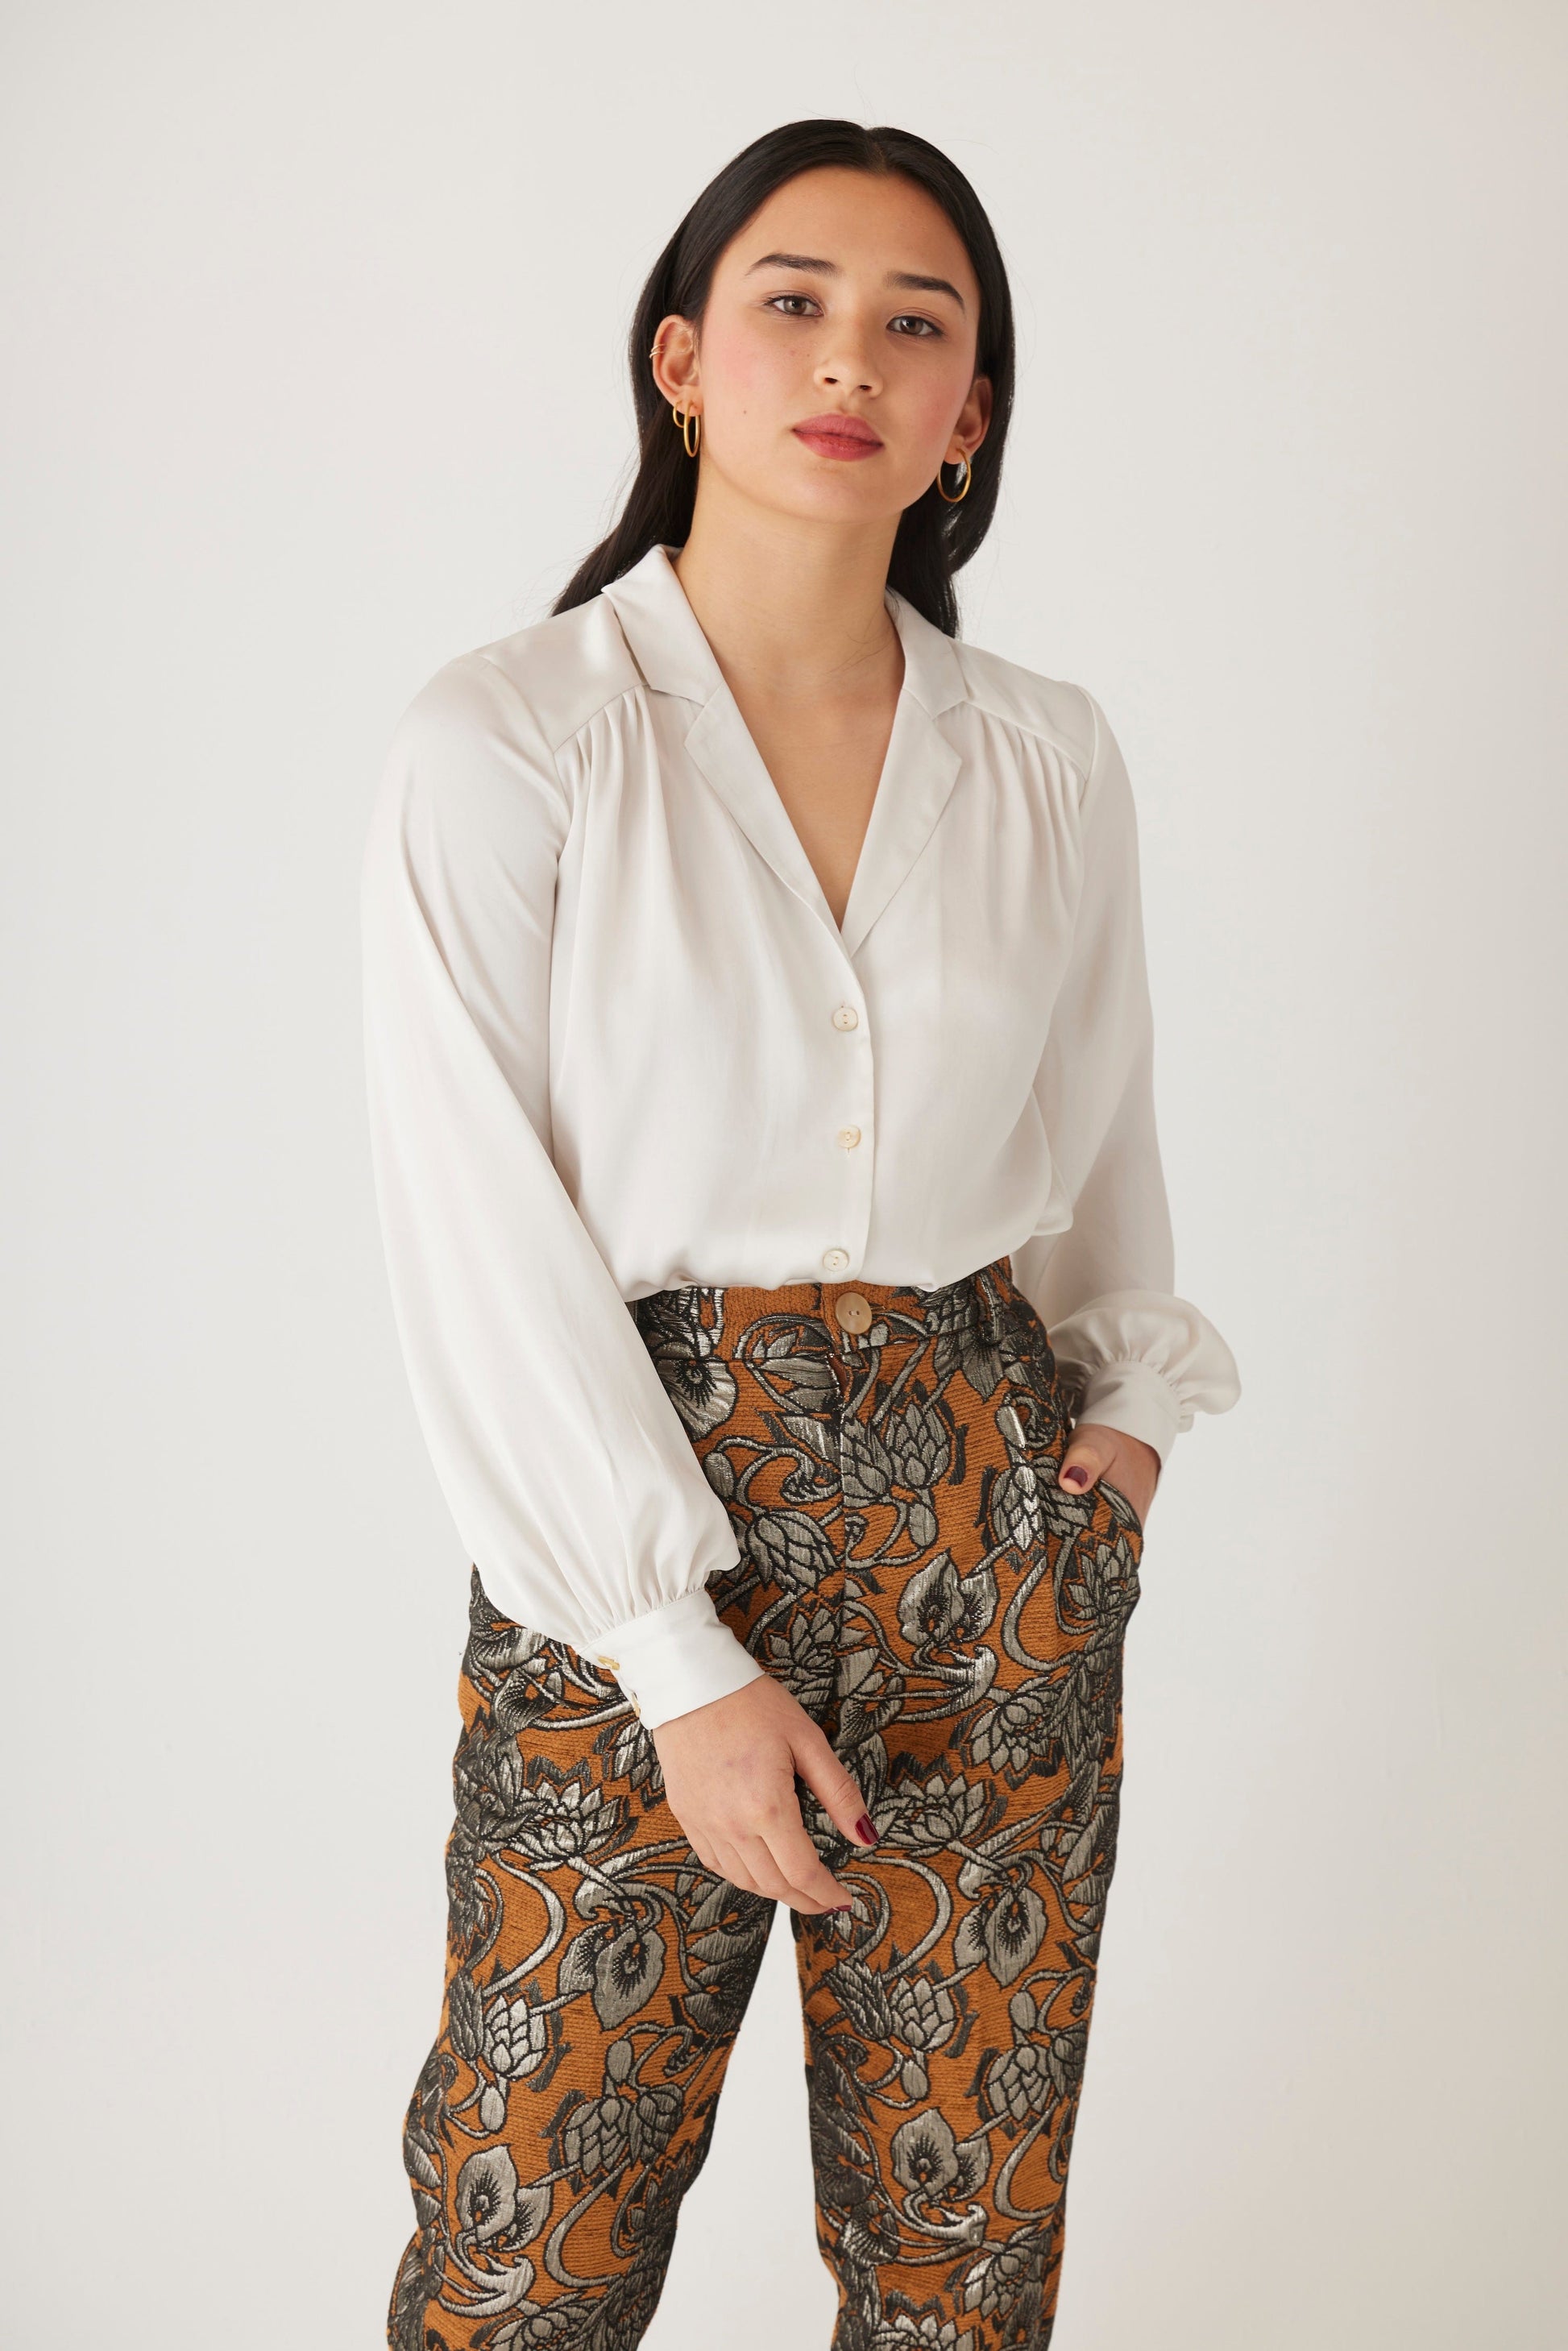 Rose Blouse in Japanese Charmeuse Blouse CHRISTINE ALCALAY   